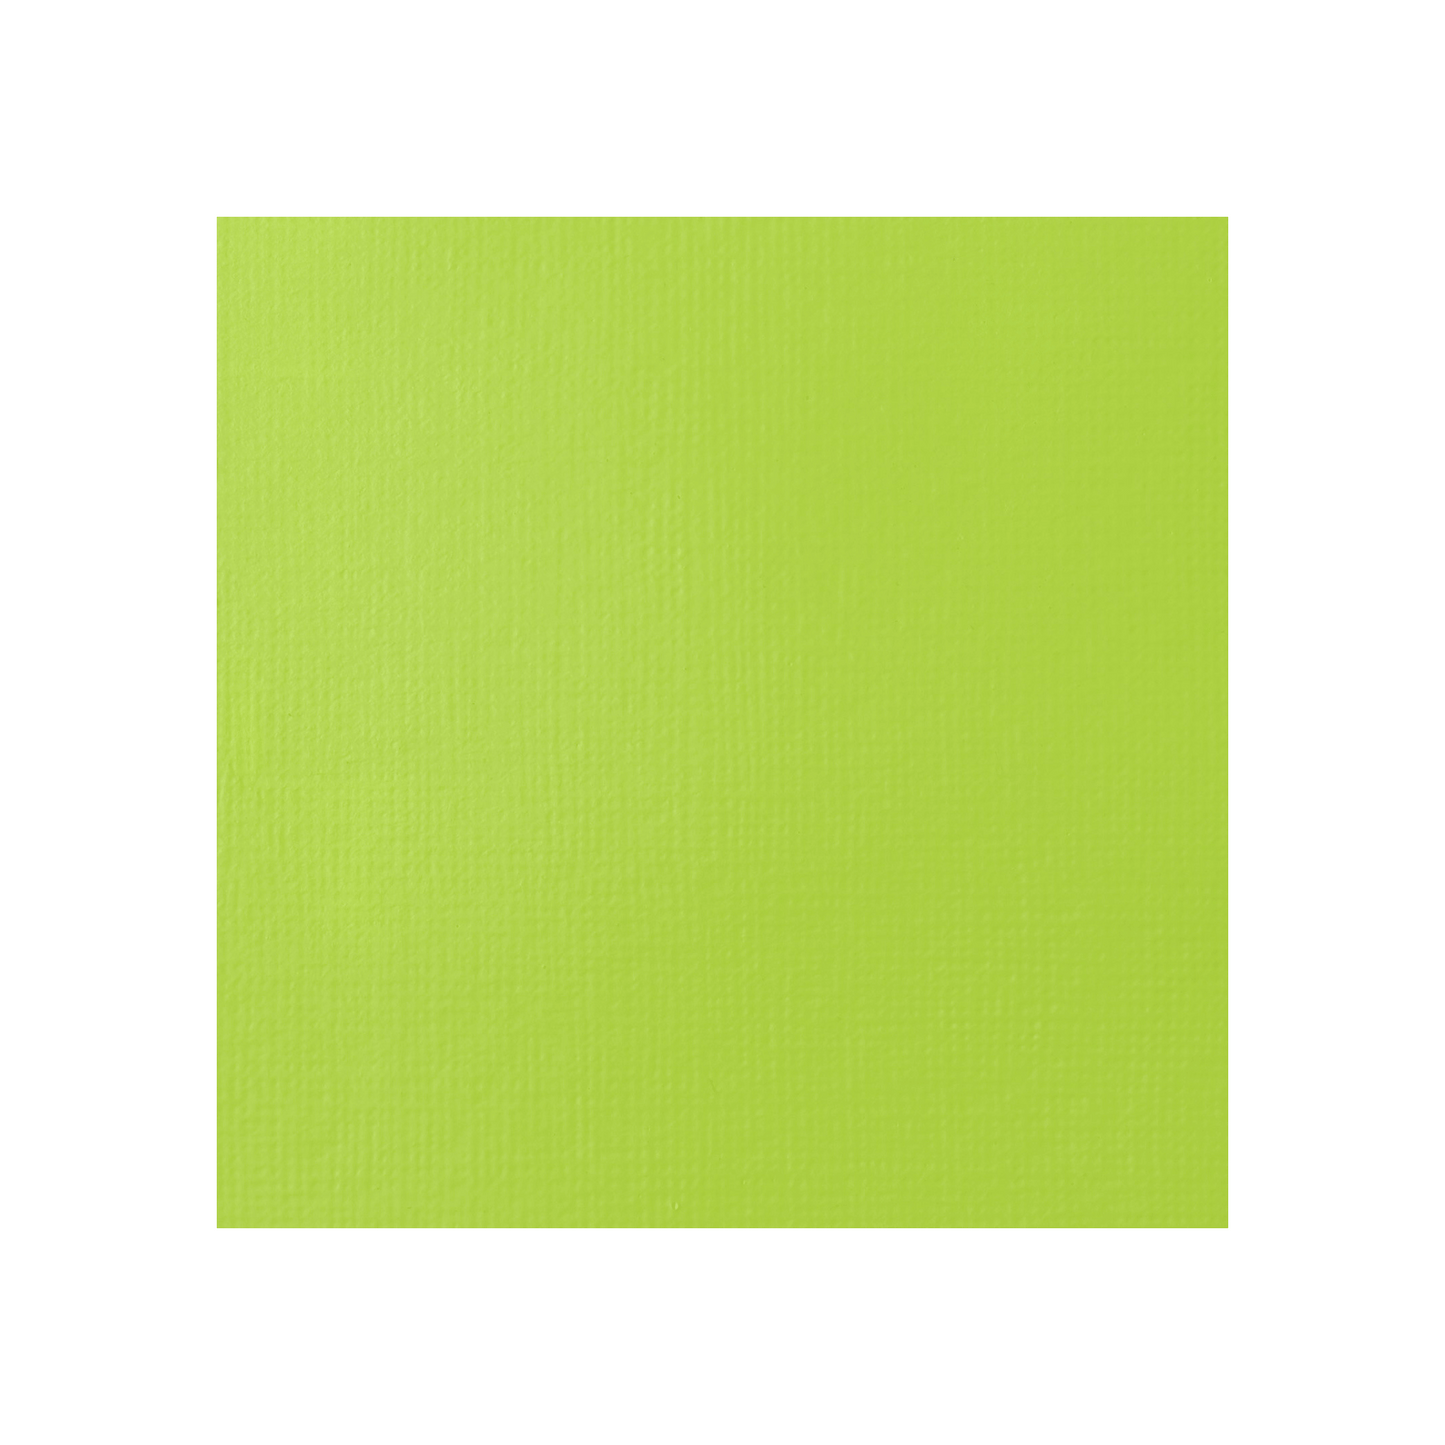 Brilliant yellow green colour swatch for Liquitex Professional Heavy Body Acrylic